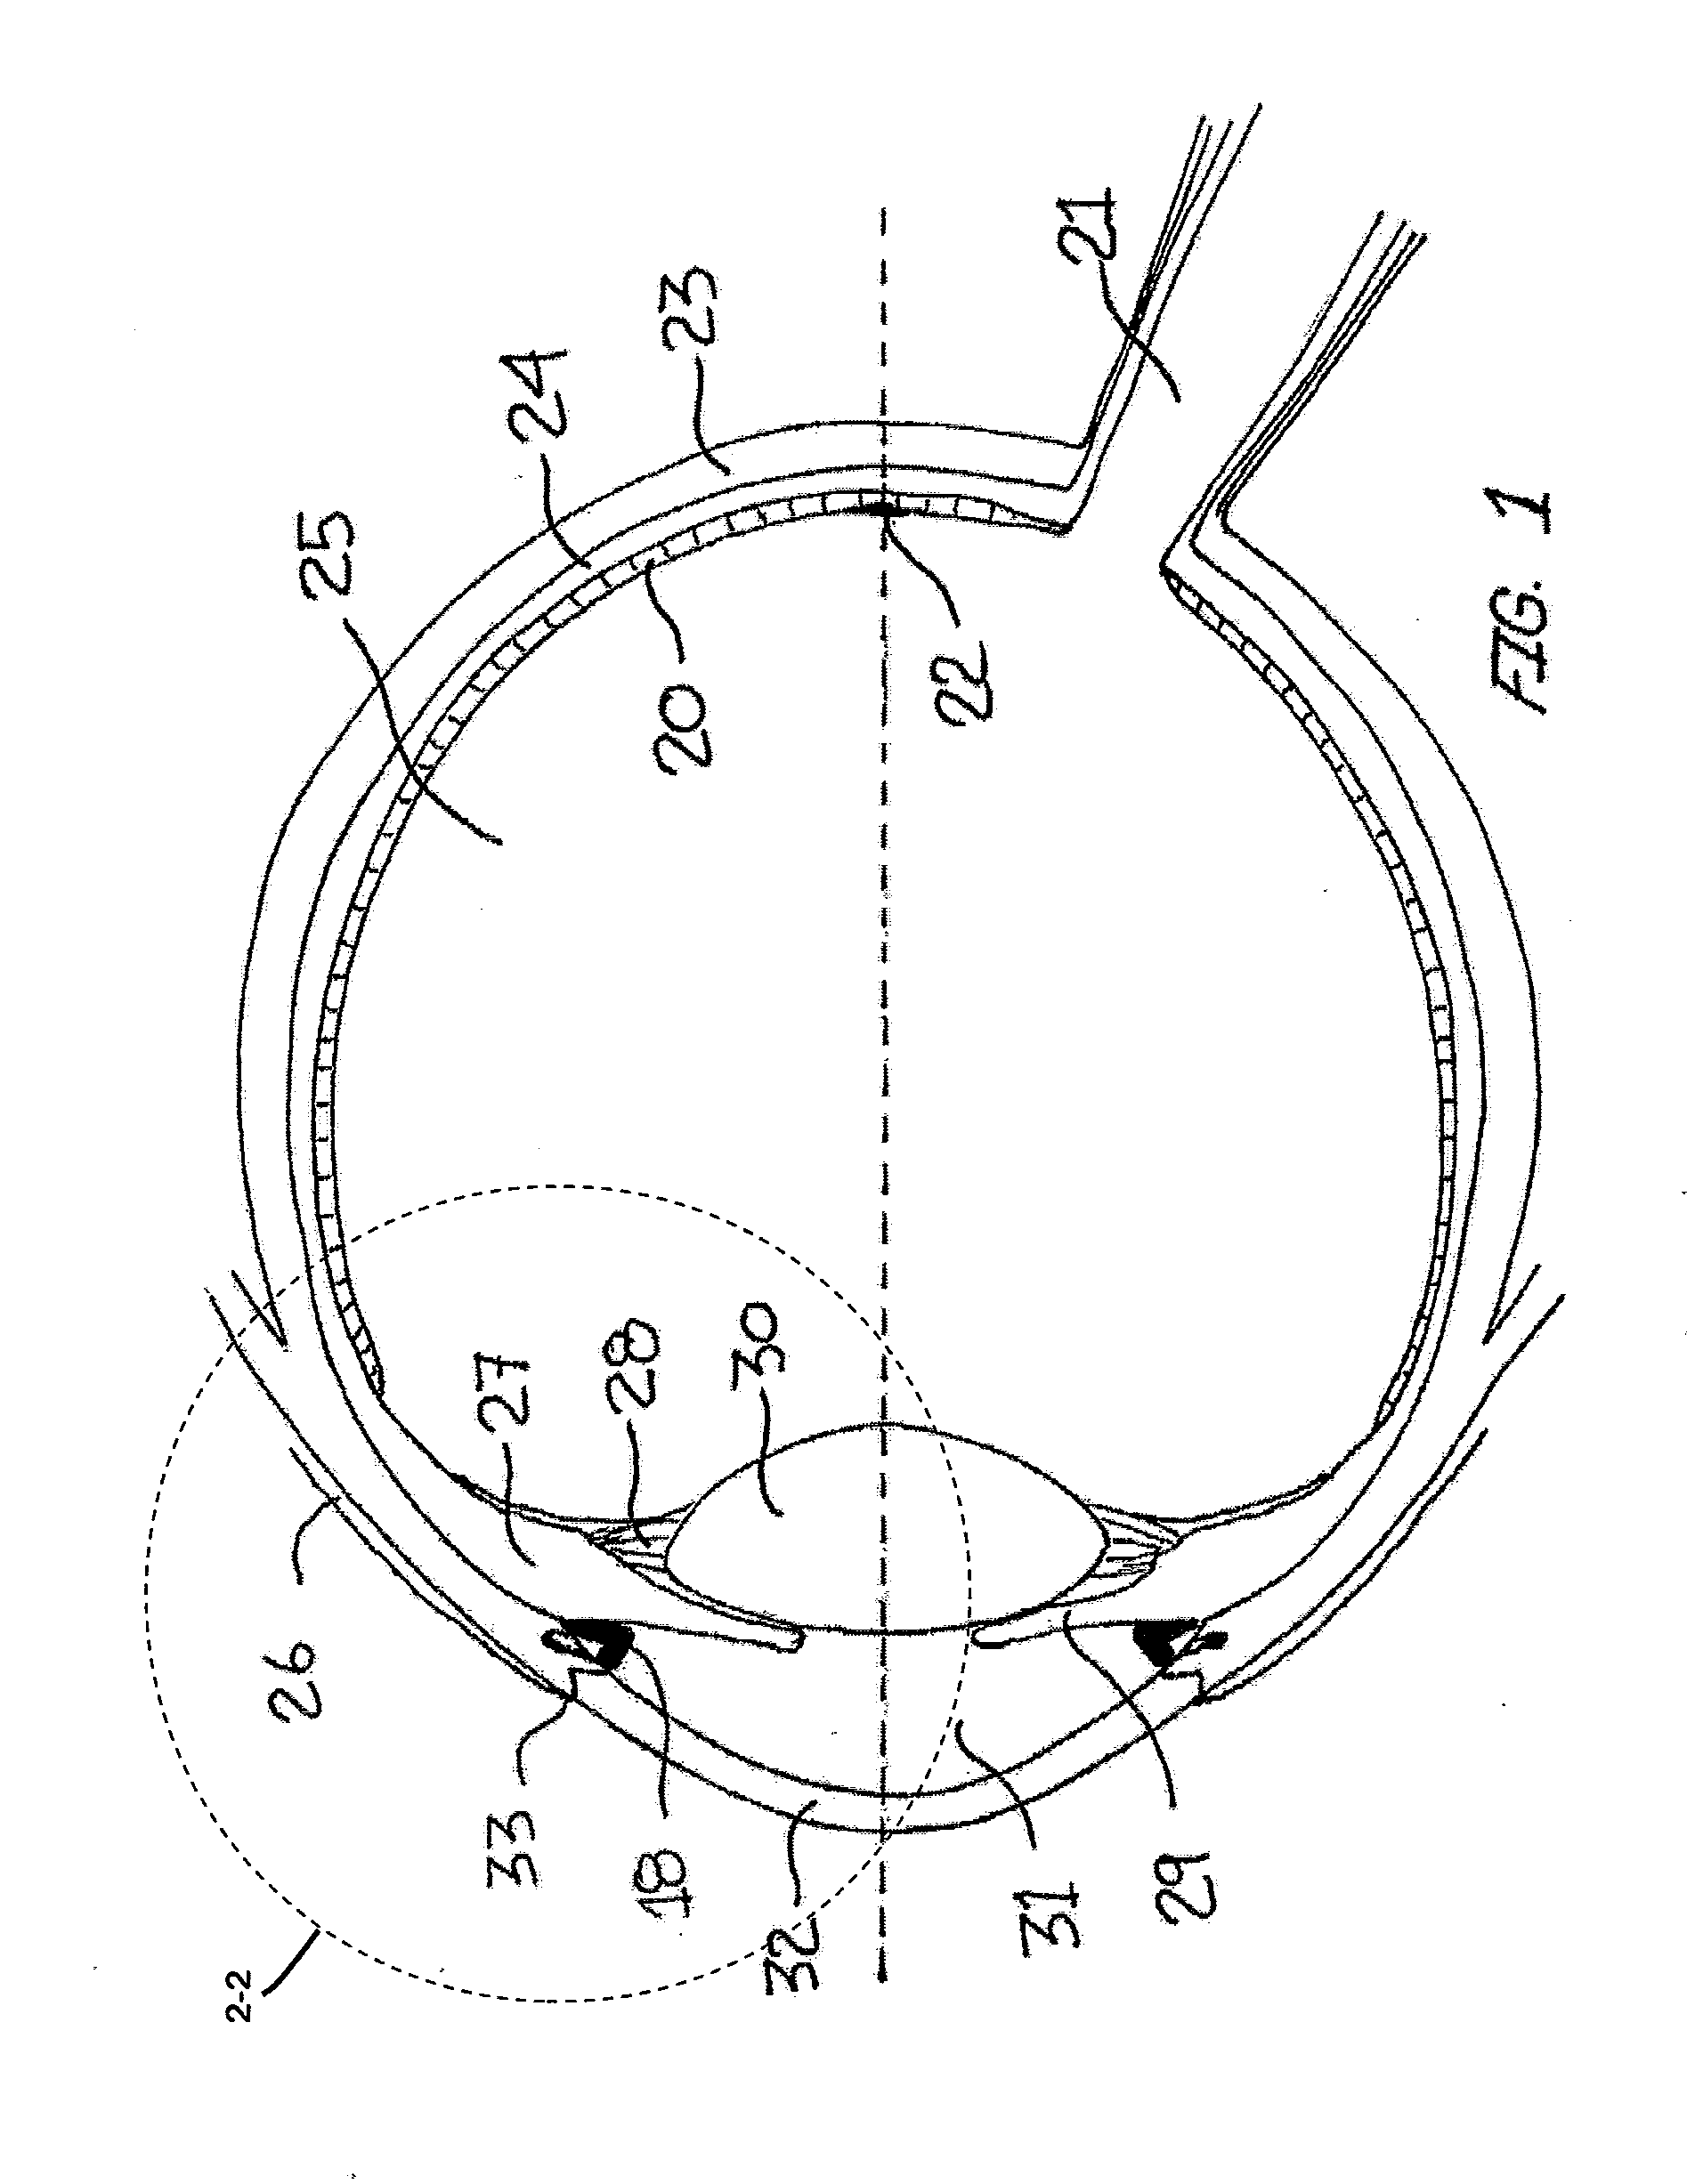 Ocular Collar Stent for Treating Narrowing of the Irideocorneal Angle